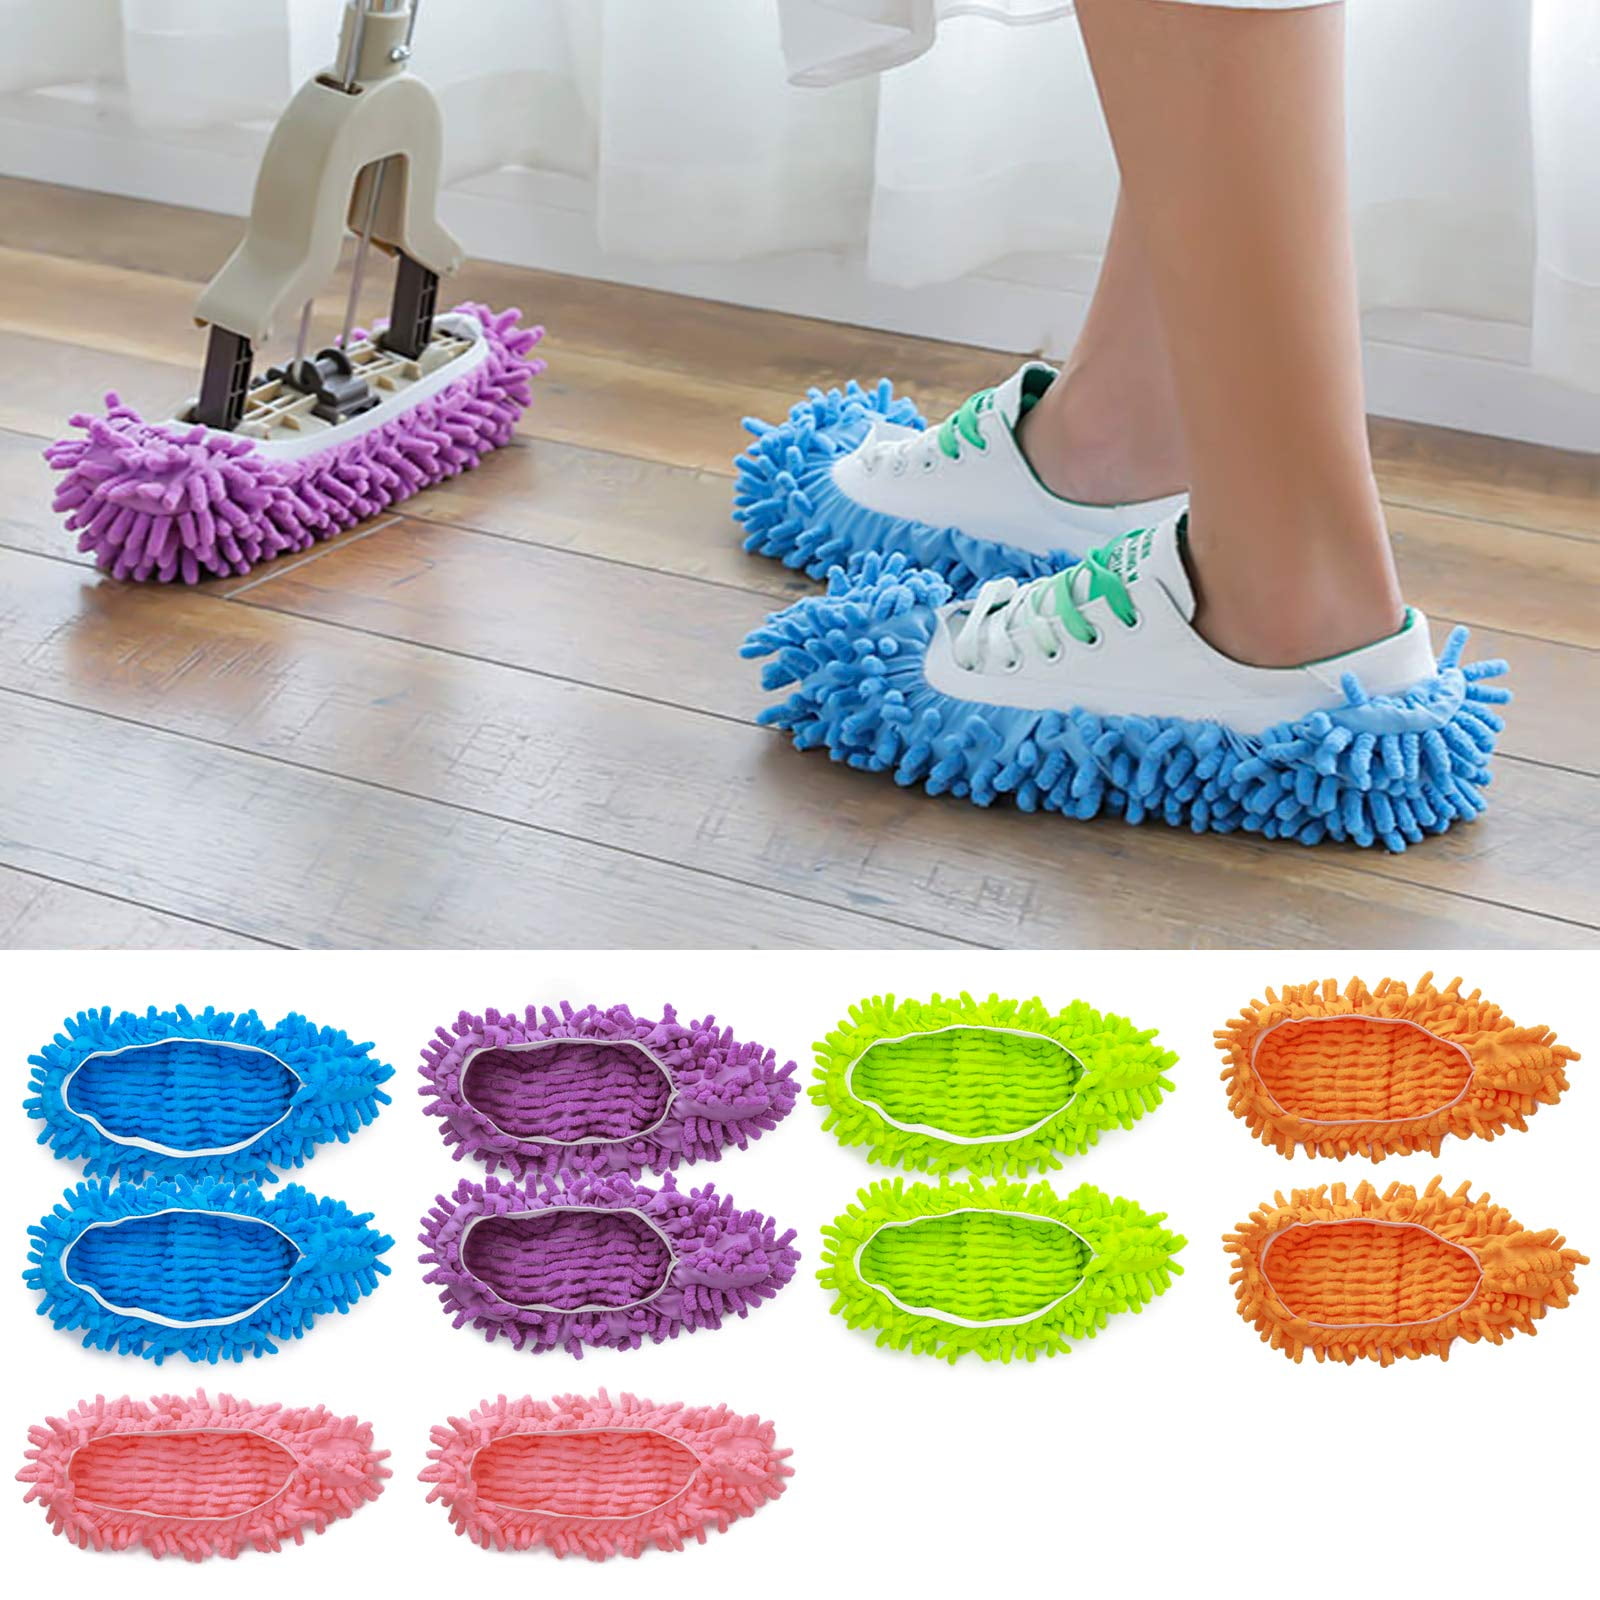 US Kitchen Living room Mop Shoes Set Dust Floor Slipper Cover House Clean Cover 